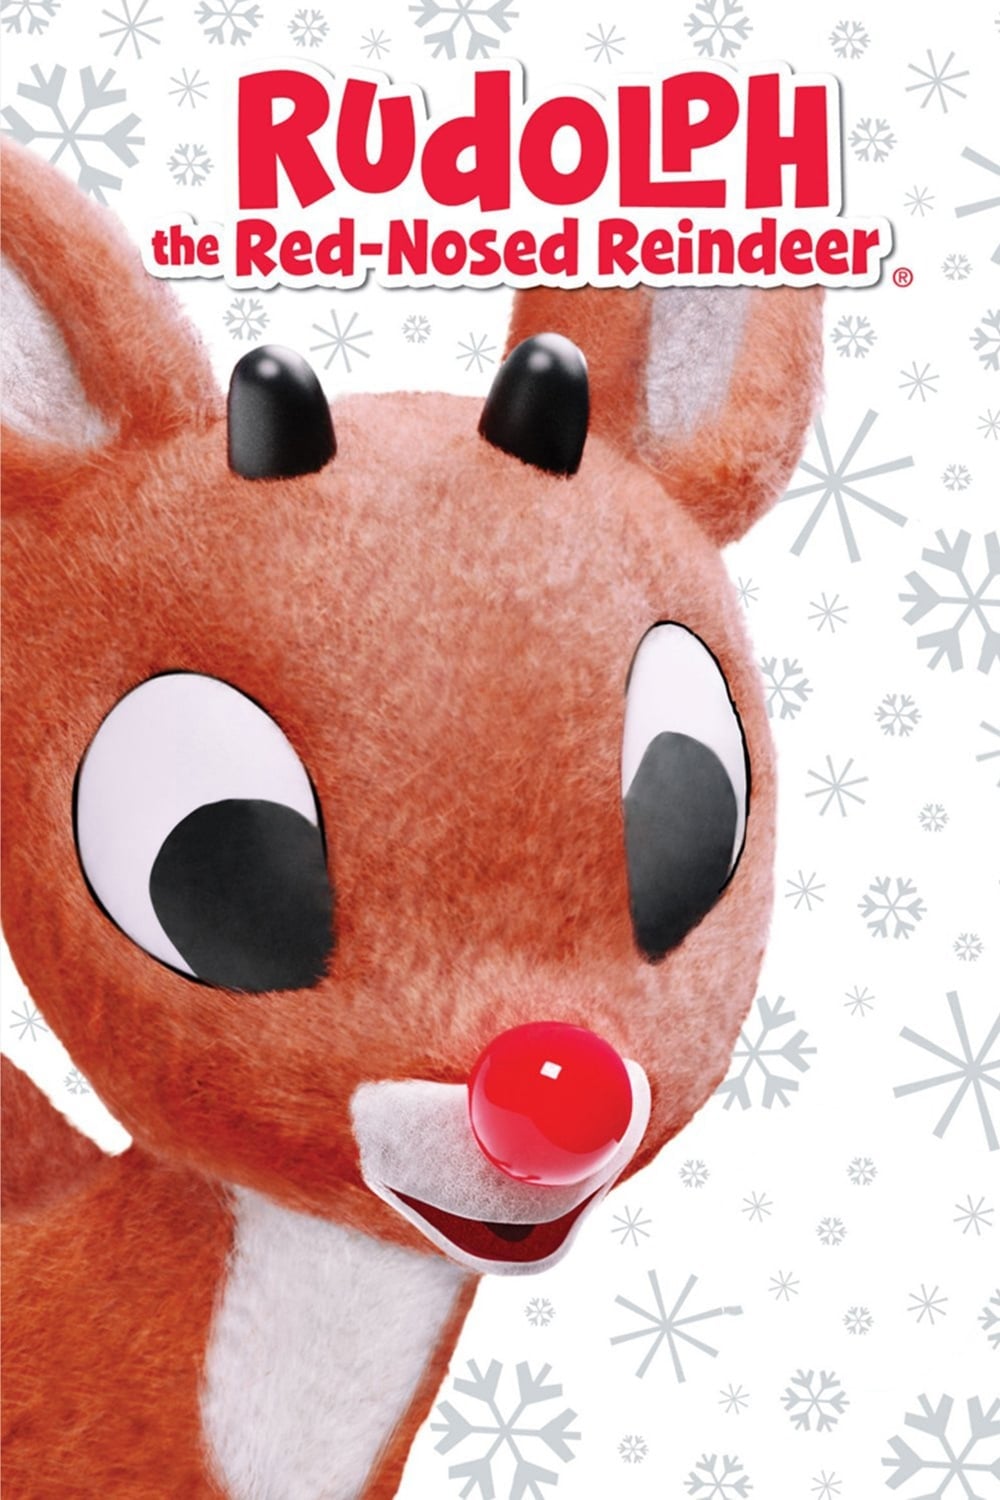 rudolph the rednosed reindeer Picture Image Abyss